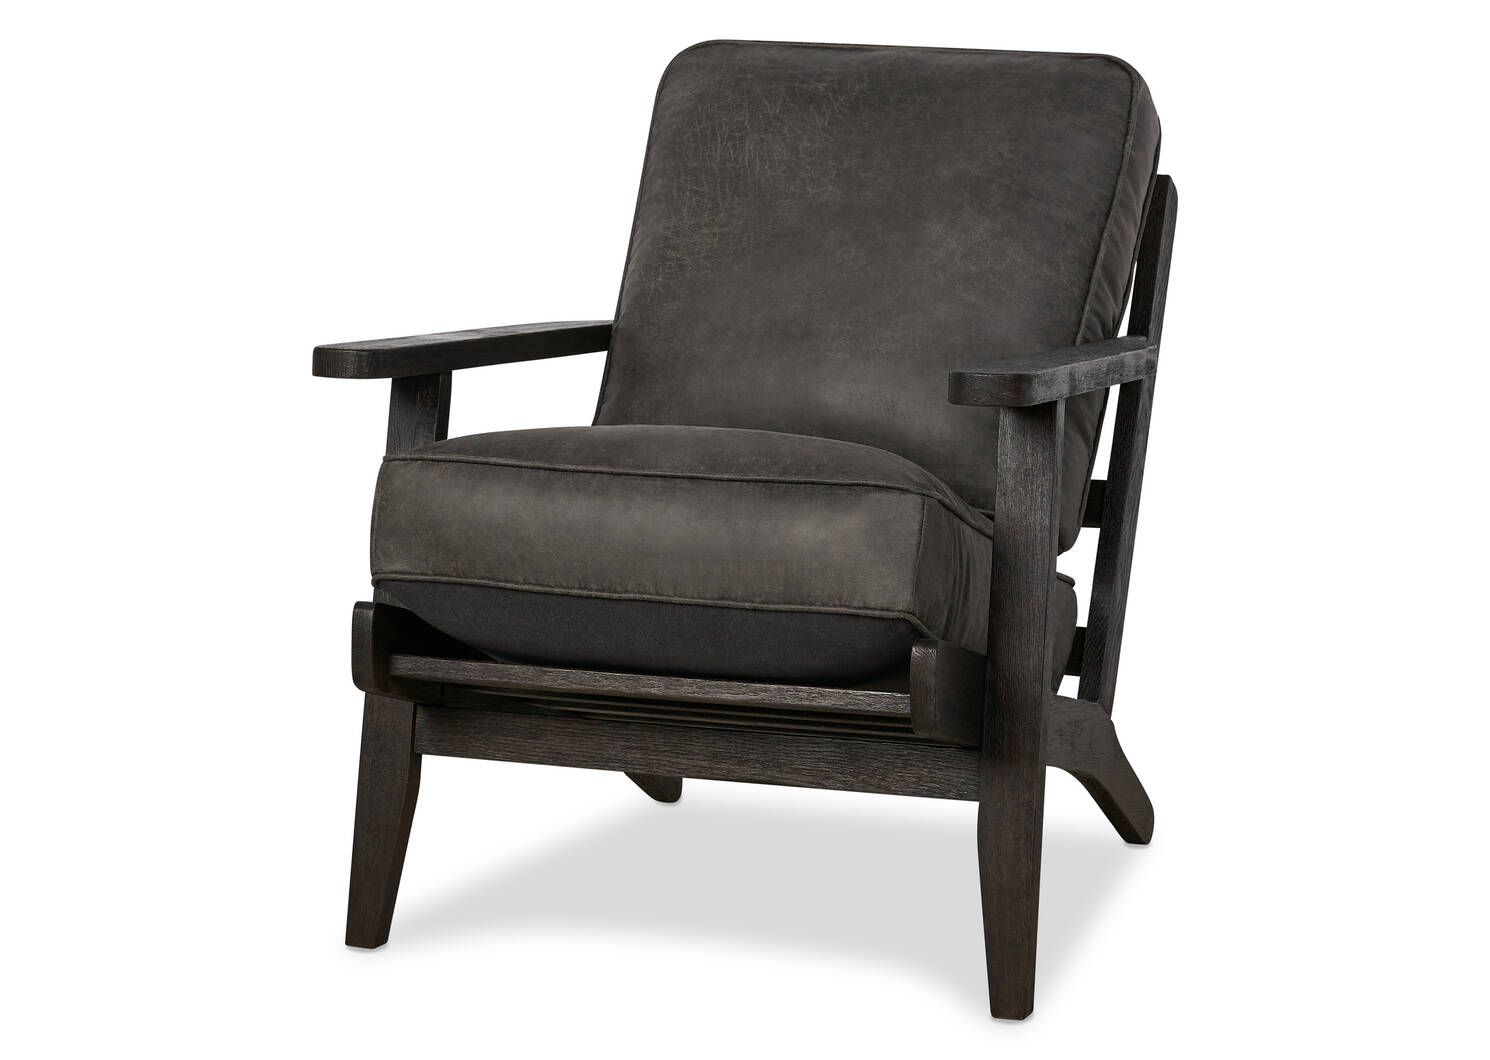 Fauteuil Powell -Blake charbon